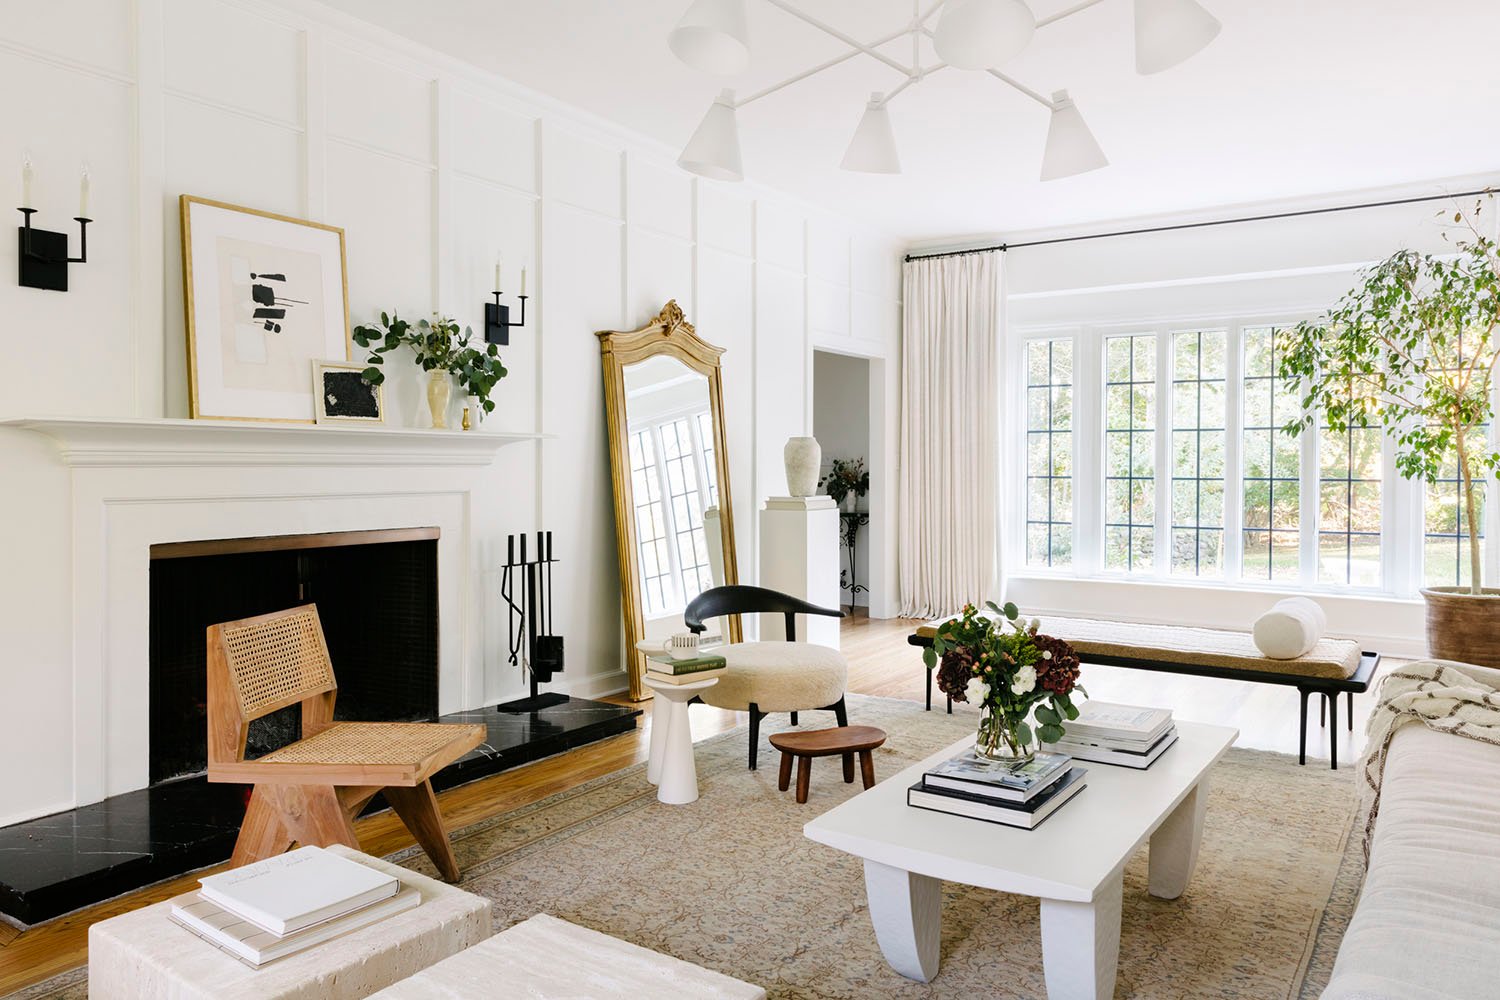 Designer Fave Neutral Paint: Benjamin Moore Simply White